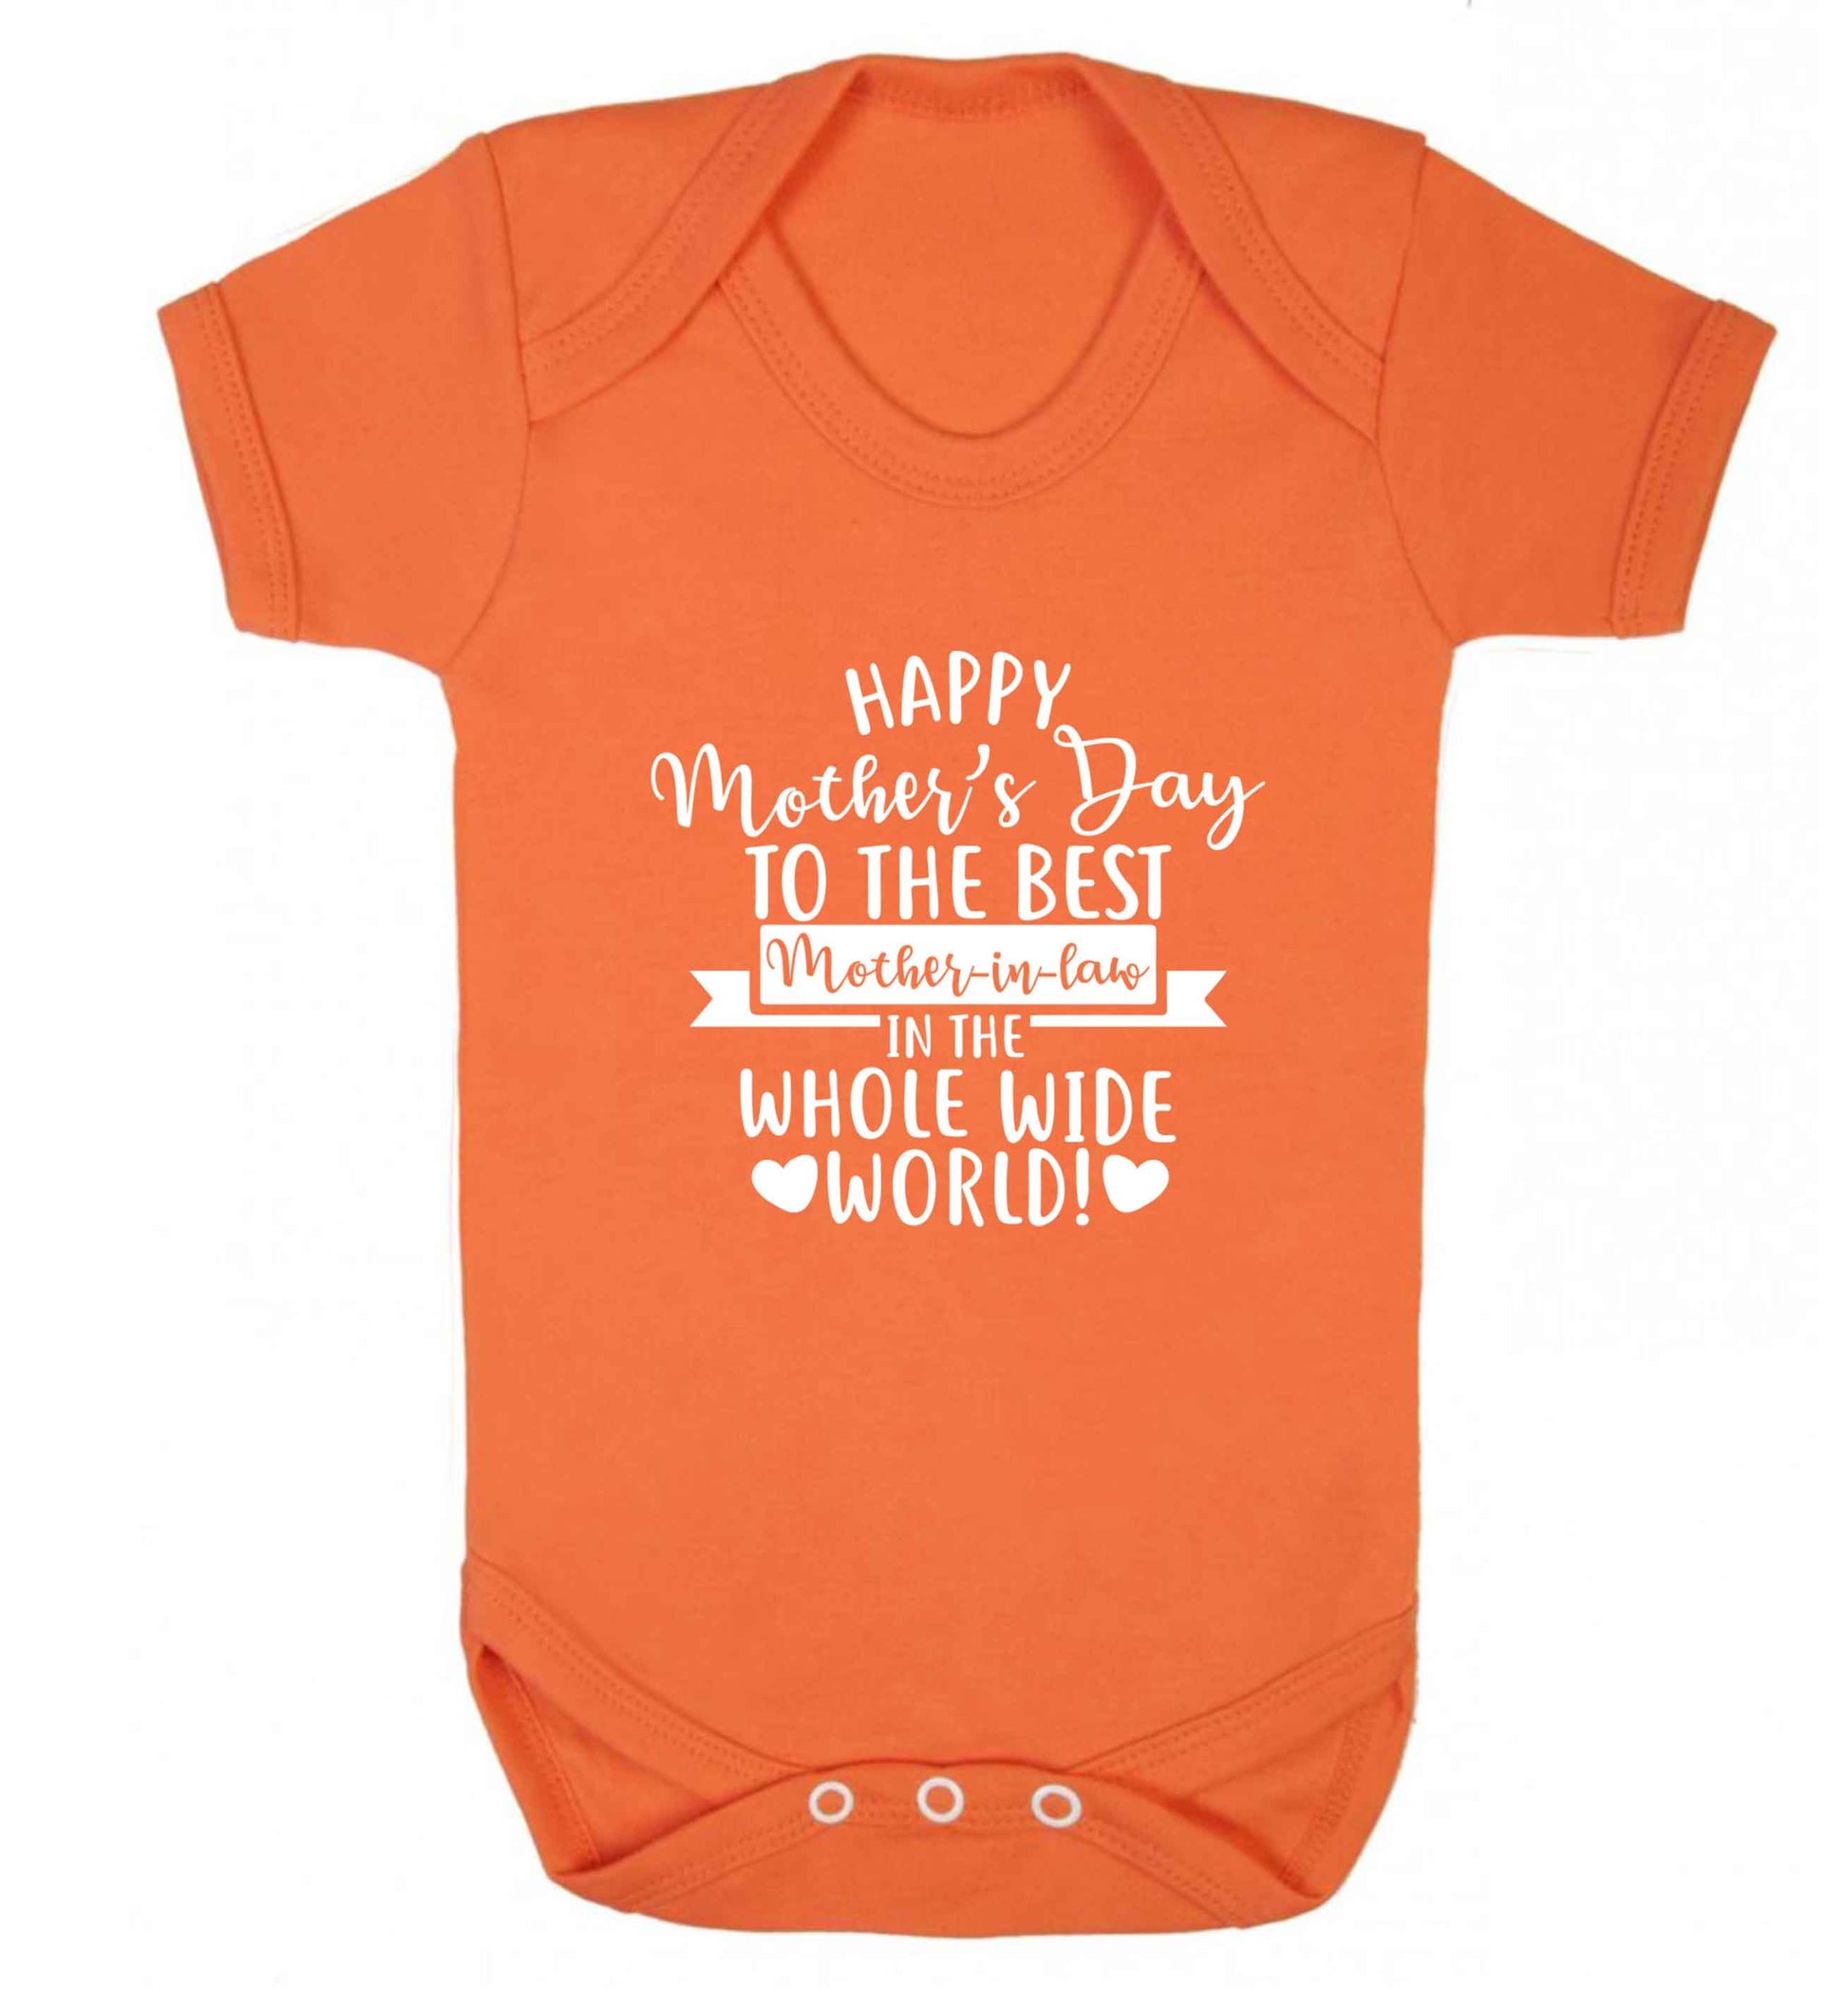 Happy mother's day to the best mother-in law in the world baby vest orange 18-24 months